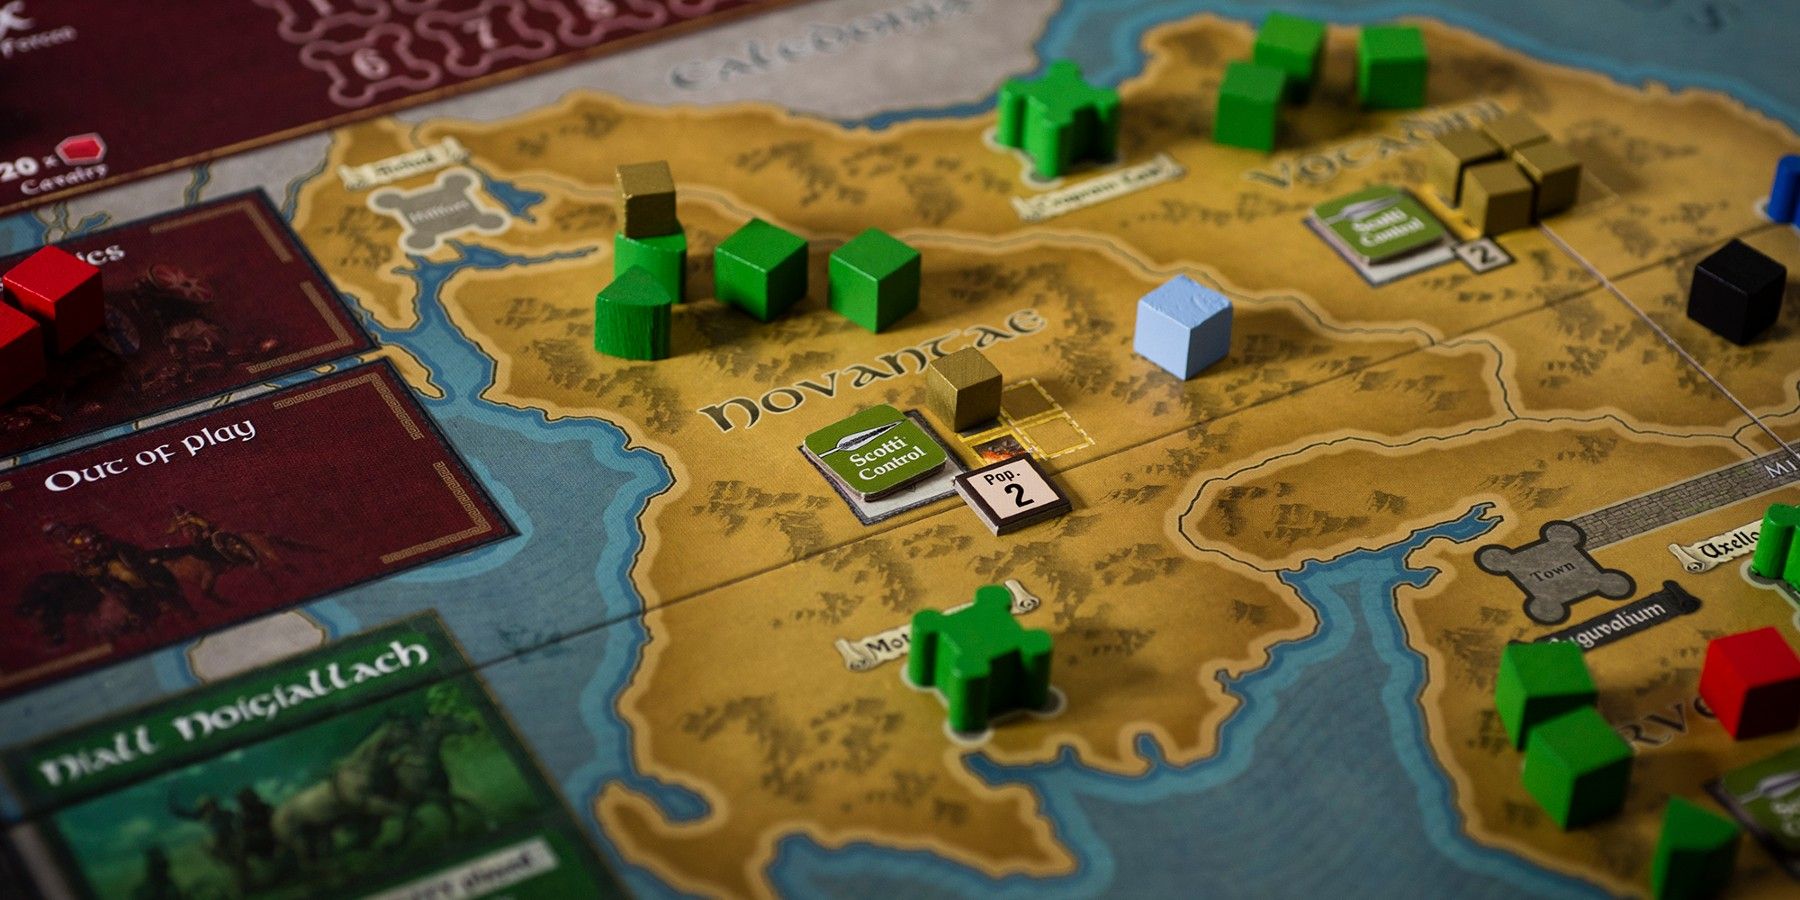 Free Board Games Are Being Given To People Laid Off Over Pandemic